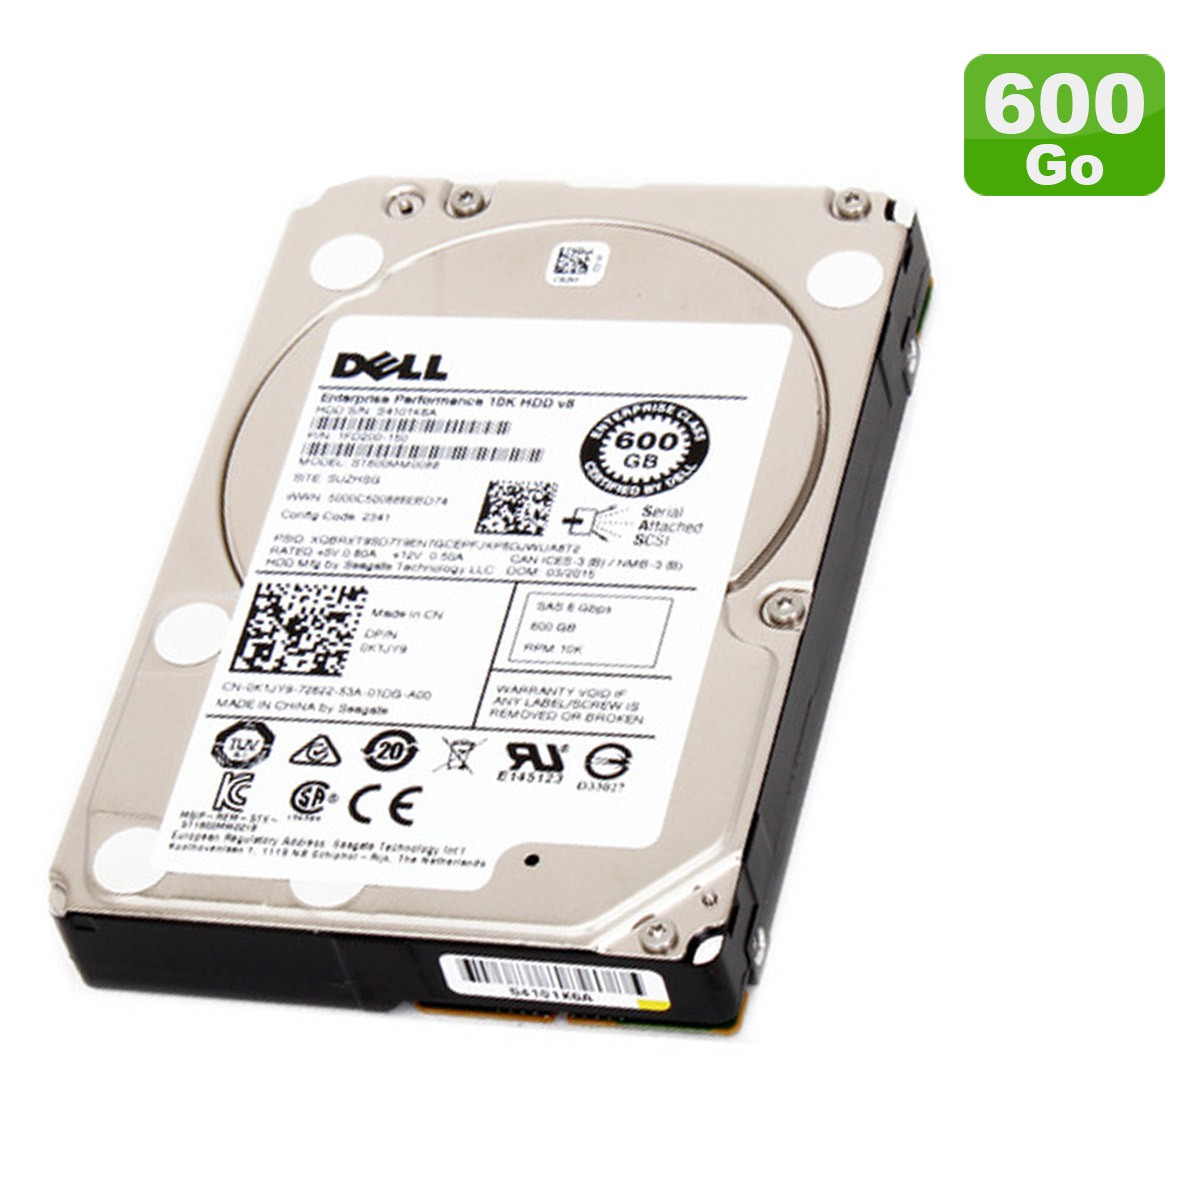 Wholesale Dell — disque dur externe hdd, 600 go, 10 to, 8 to, meilleur prix  From m.alibaba.com